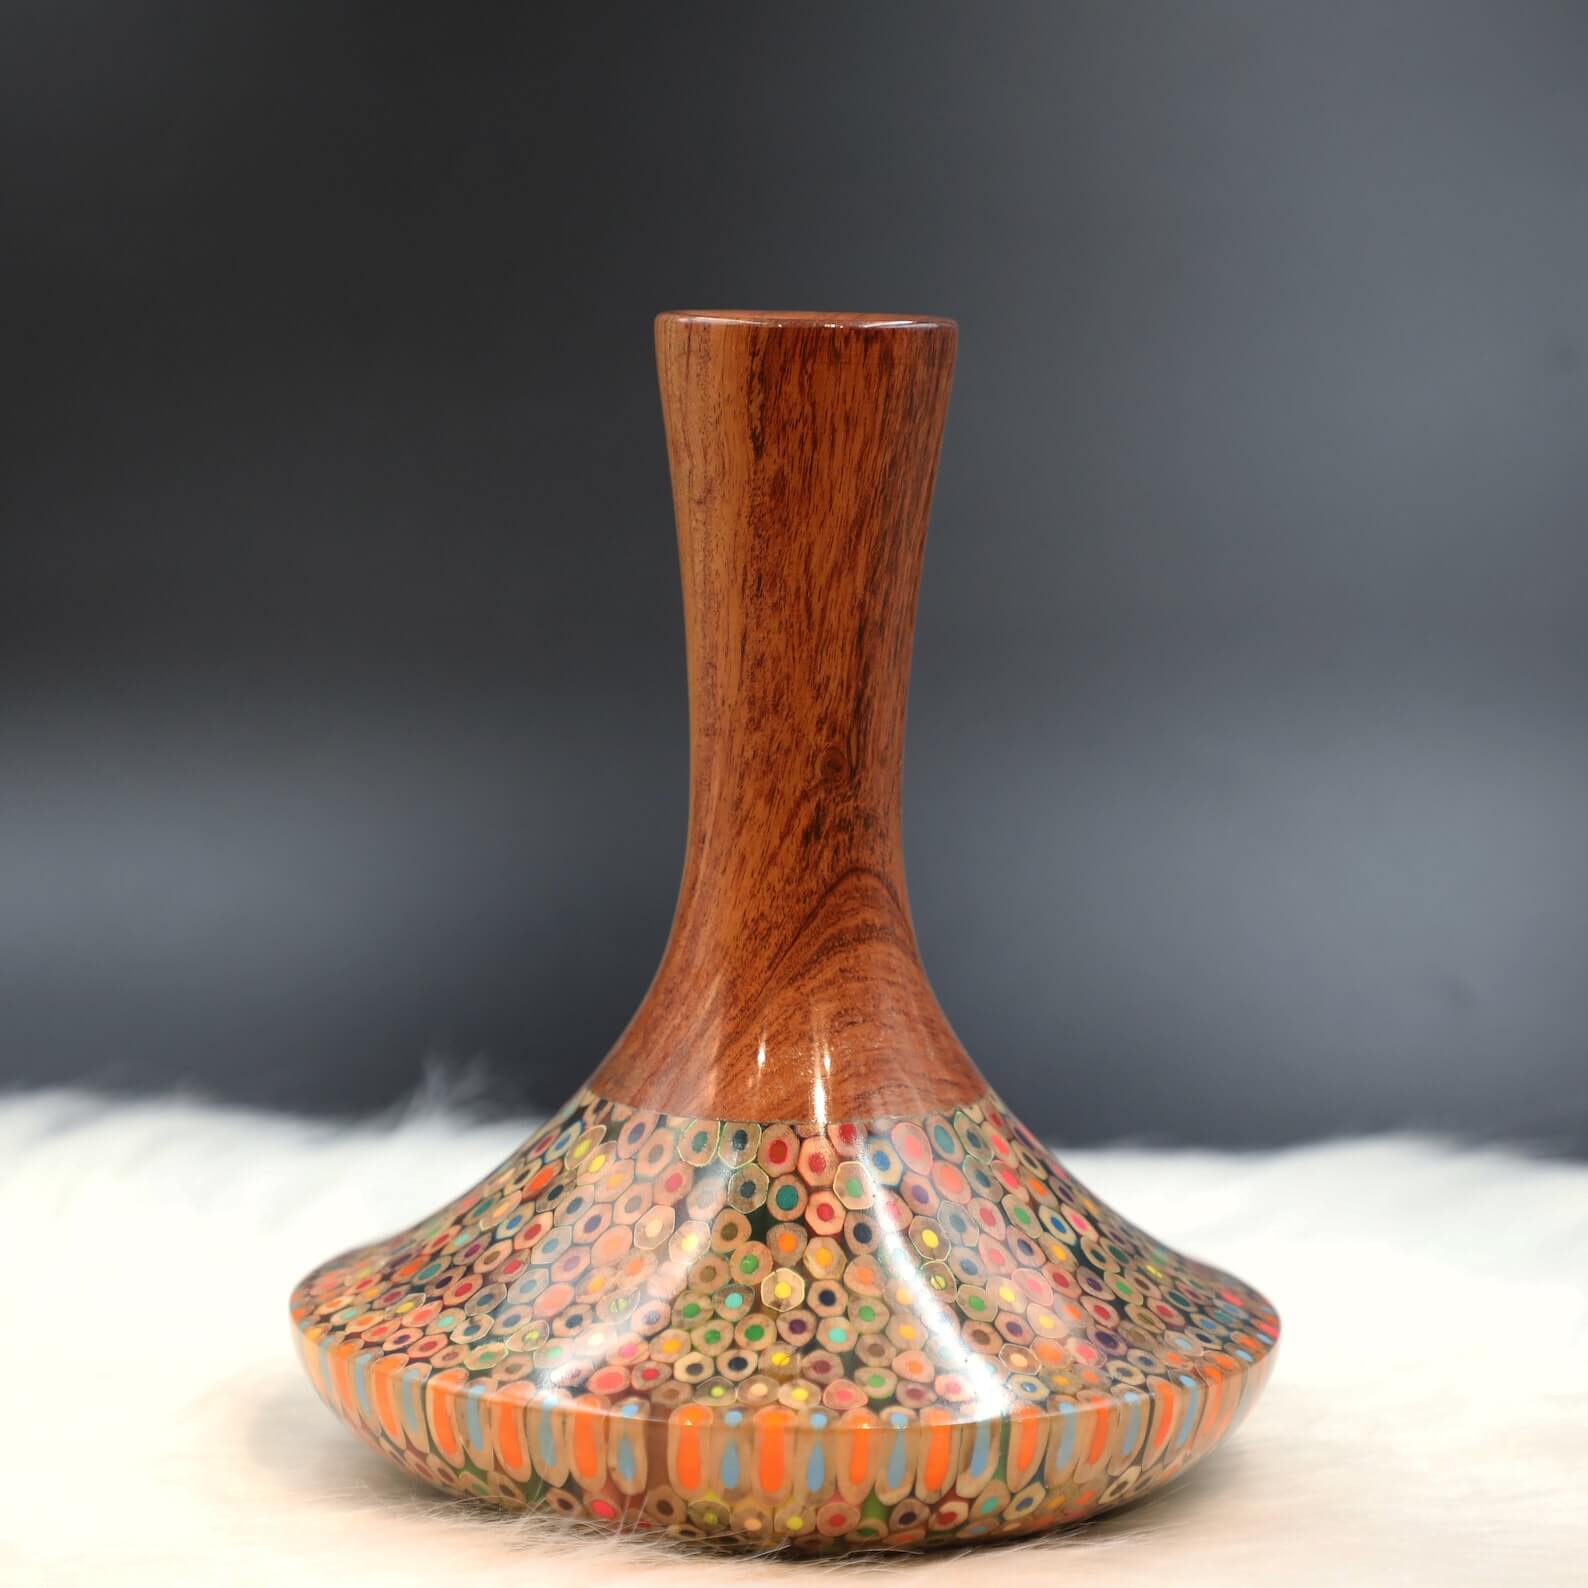 With-wood-multicolor_Handmade Dried Flower Bud Vase - Resin Colorful Pencil Vase